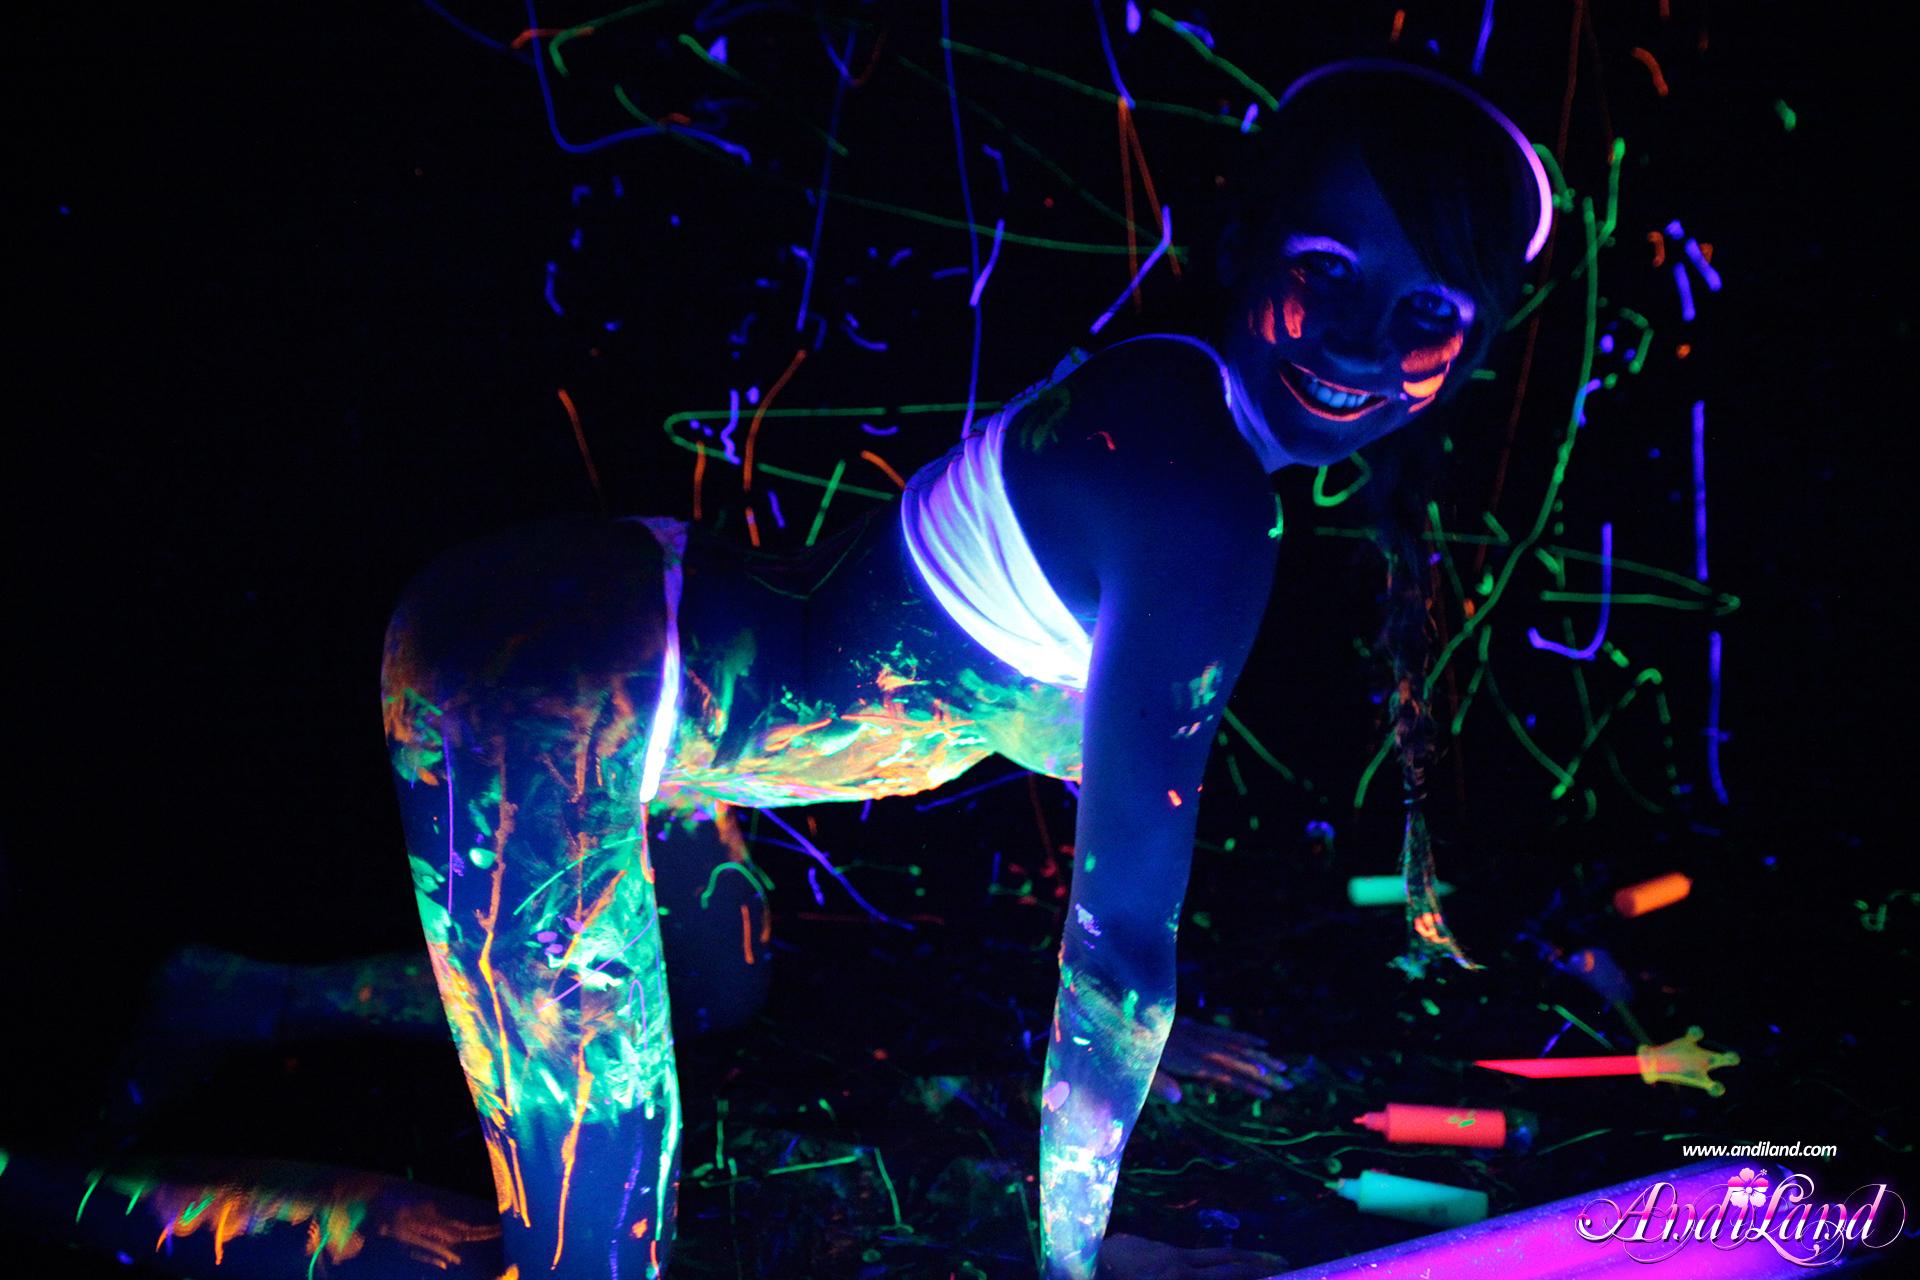 Andi Land gets super kinky with the black light and neon body paint #53134271